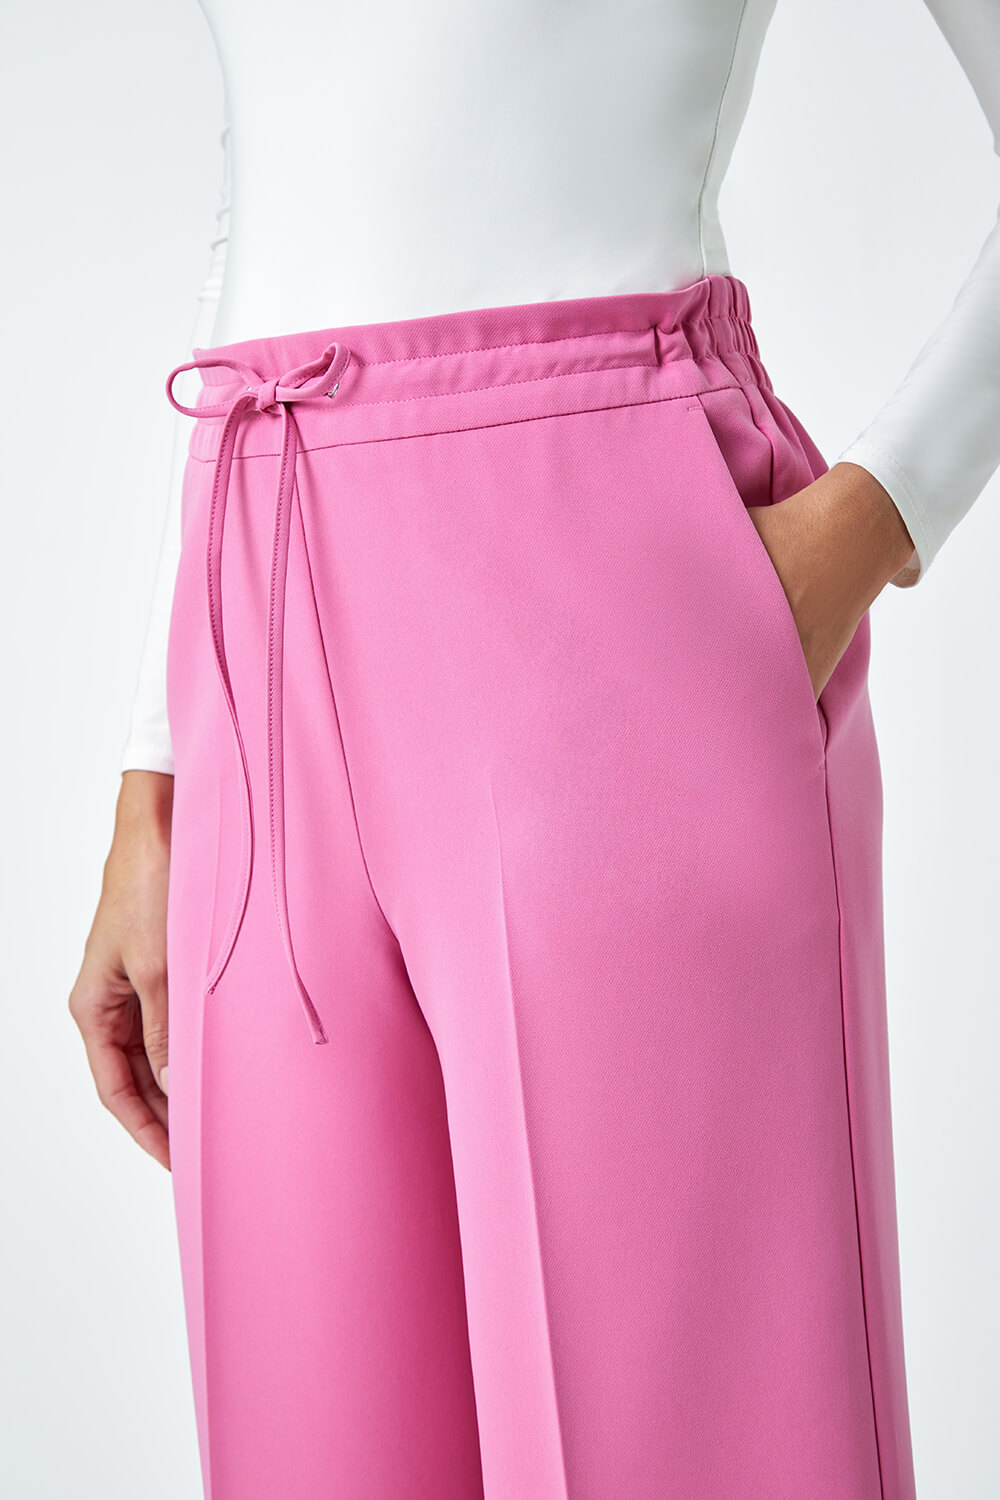 Light Pink Wide Leg Tie Front Stretch Trouser, Image 5 of 5